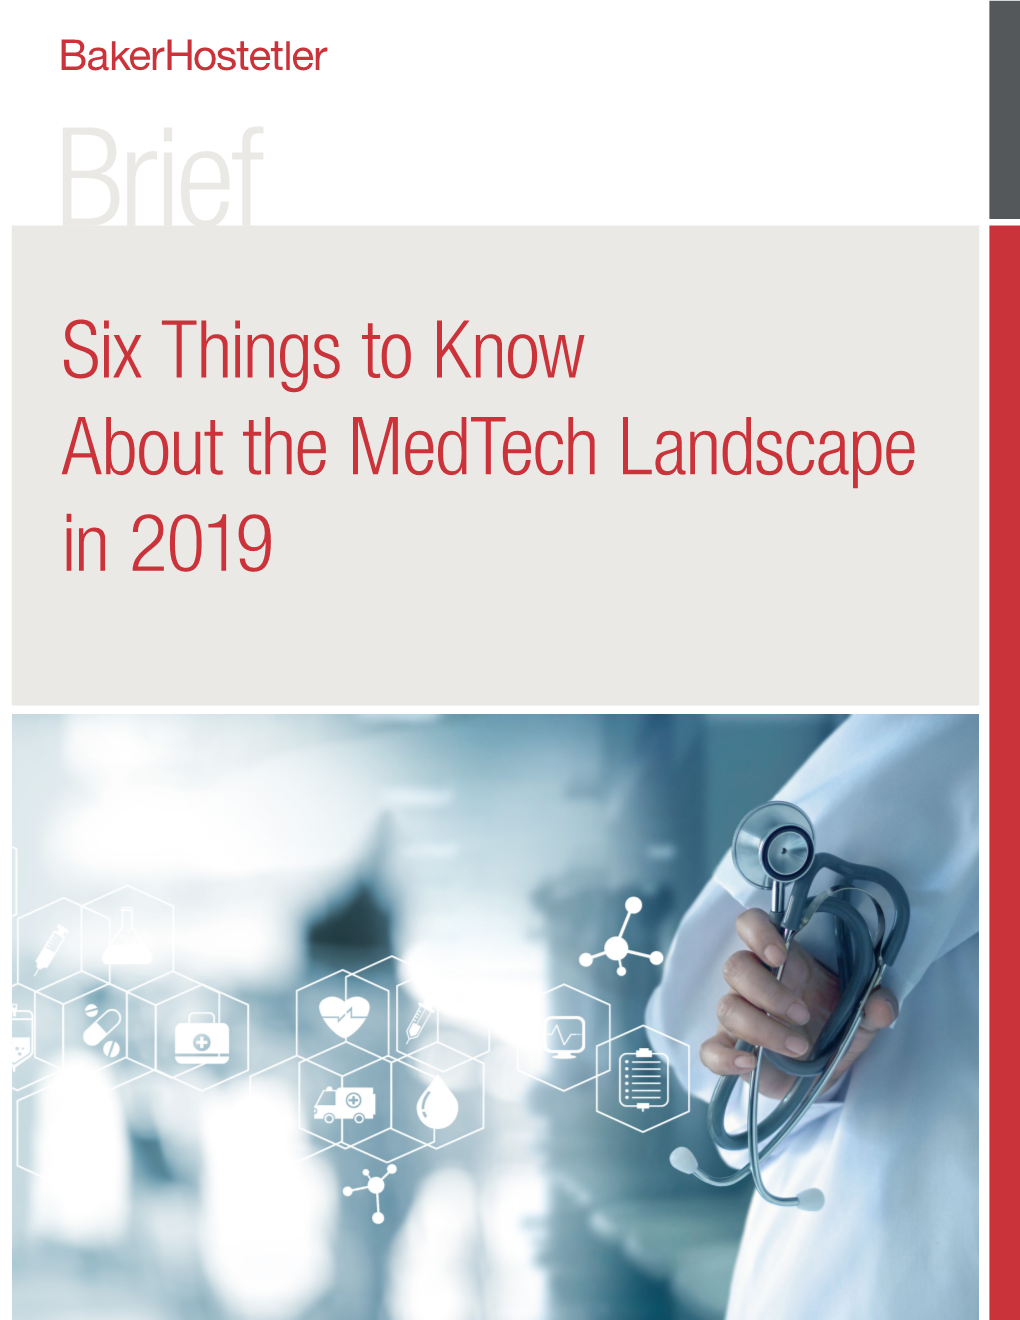 Six Things to Know About the Medtech Landscape in 2019